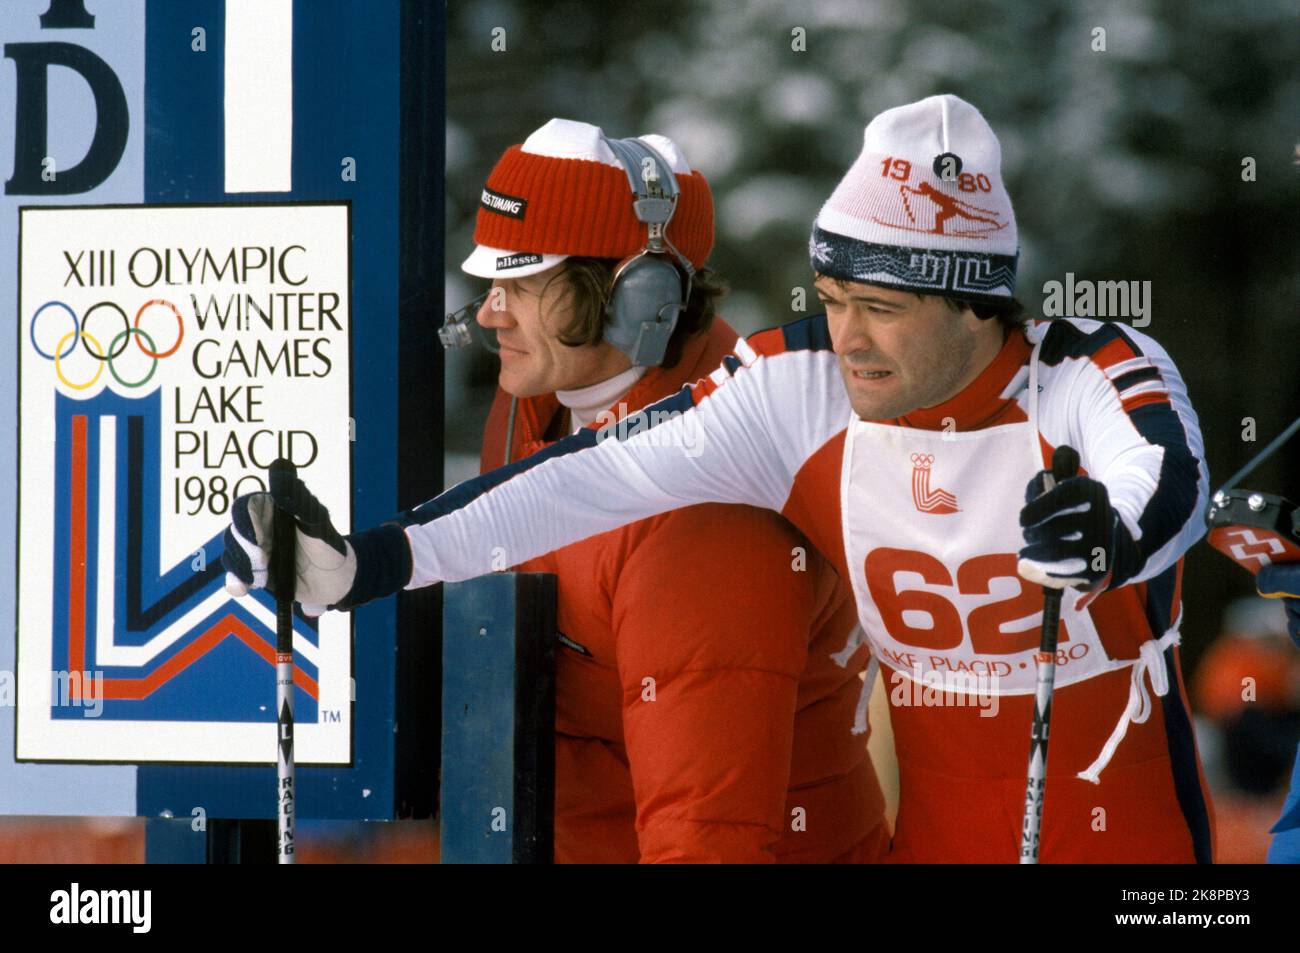 Lake Placid, N.Y., USA, 198002: Olympic Lake Placid 1980. Cross -country skiing, 15km men. The picture: A concentrated Ove Aunli (NOR) on the starting line of 15km, February 17, 1980. Aunli went into 3rd place and bronze. The gold went to Thomas Wassberg (Sve), while Juha Mieto (fine) took silver in the distance. Photo: NTB / EPU / NTB Stock Photo